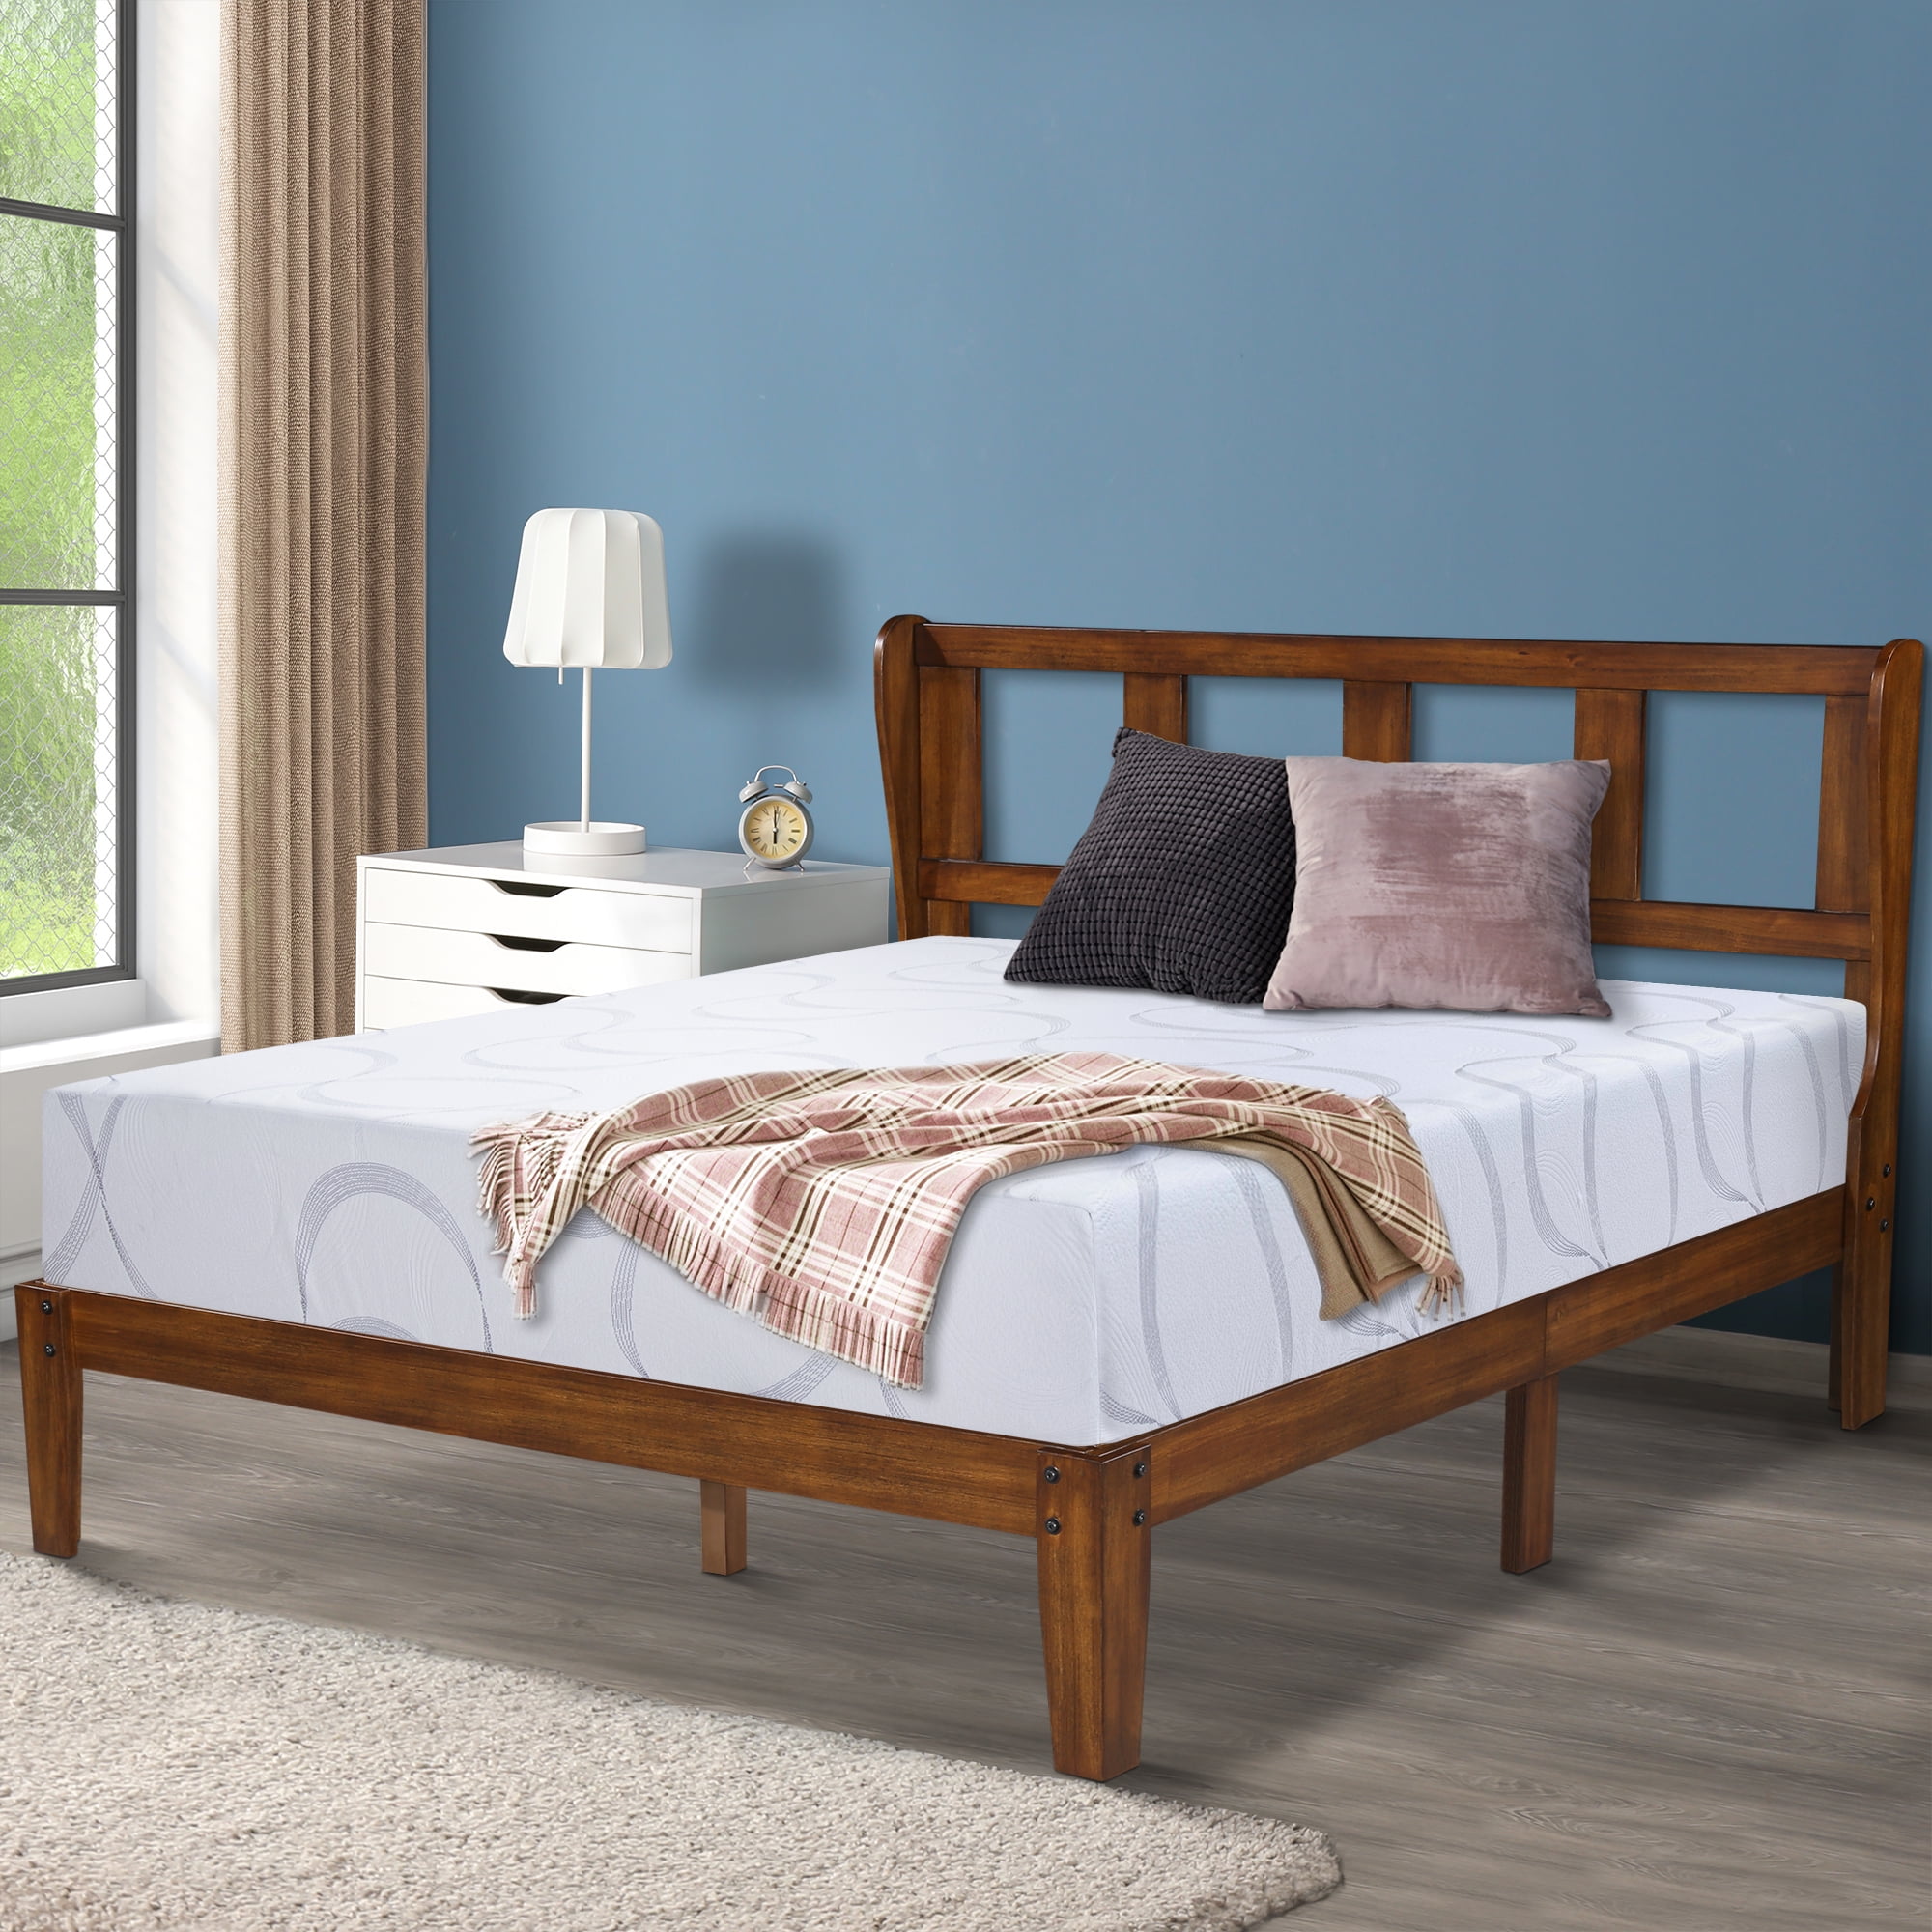 Zinus Priage By Deluxe Antique Espresso, Priage By Zinus Deluxe Antique Espresso Wood Platform Bed With Headboard